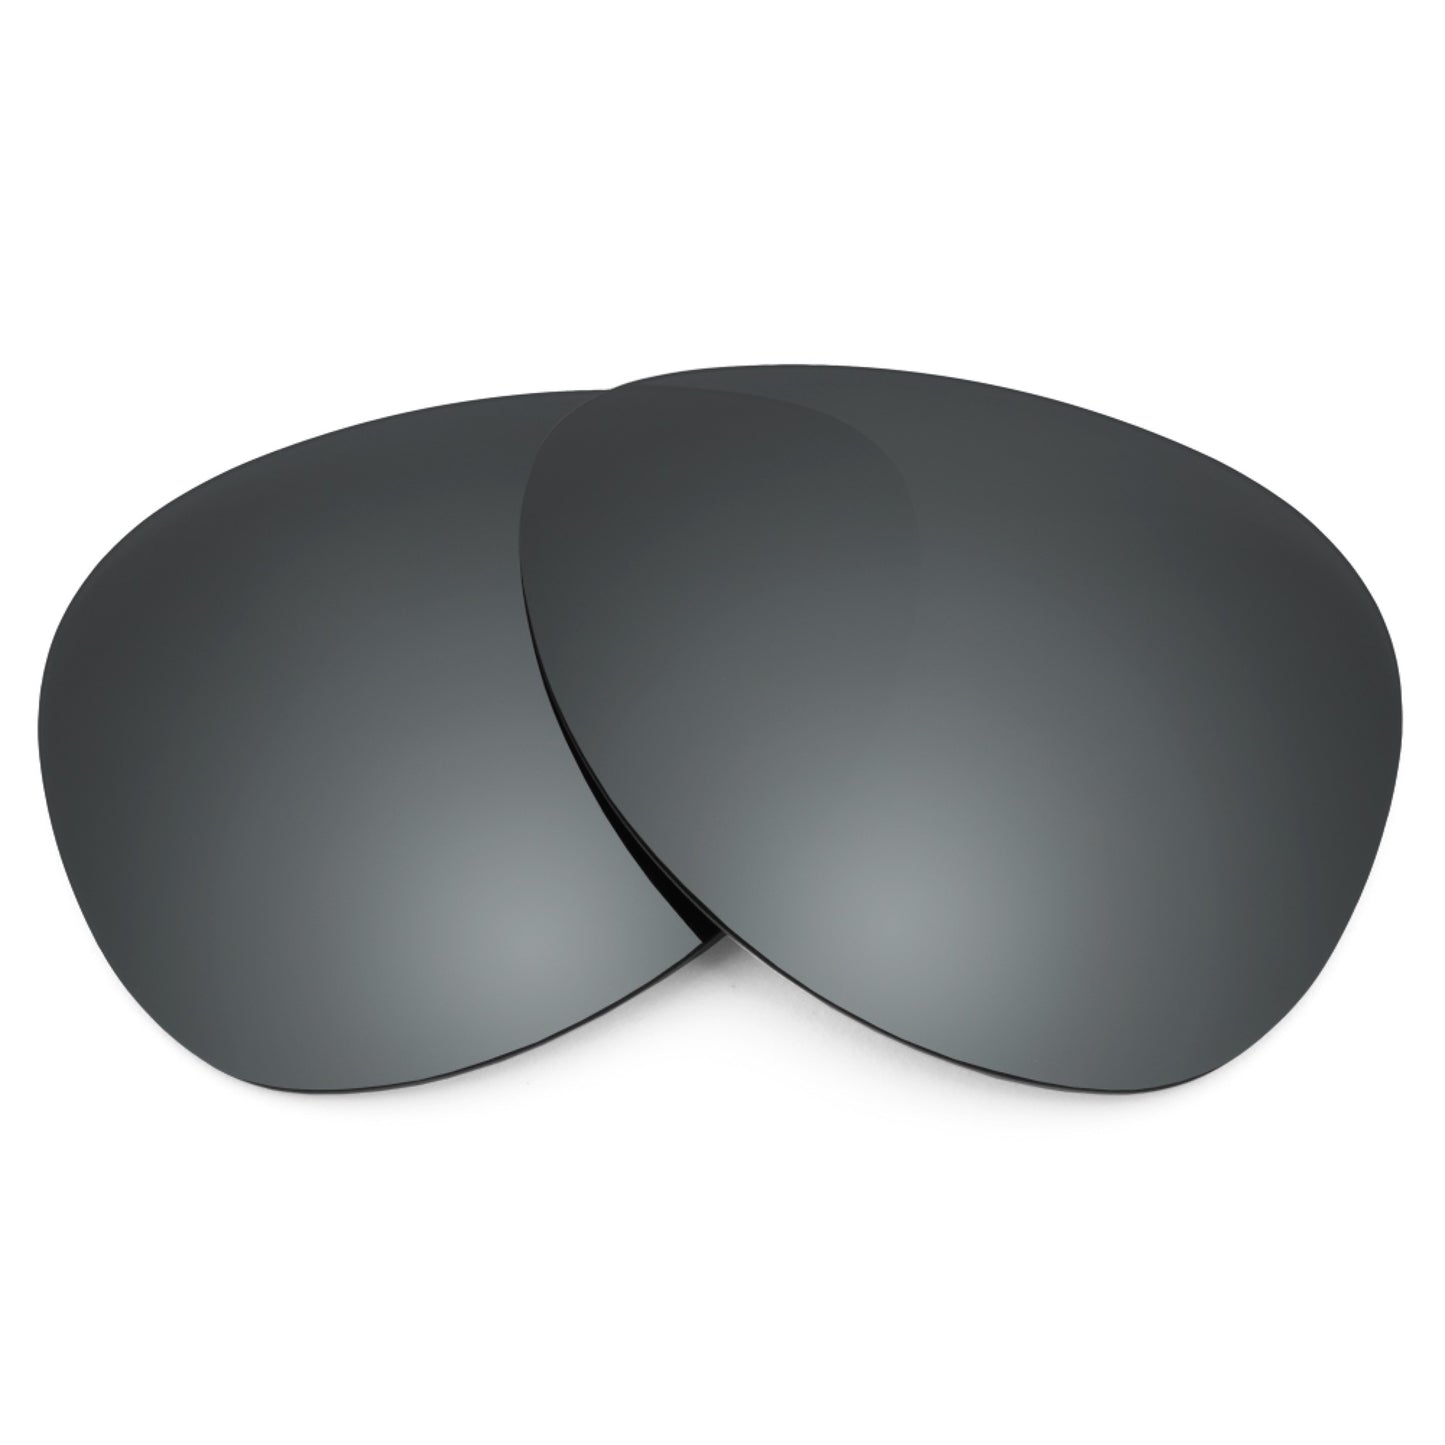 Revant replacement lenses for Ray-Ban Cats 5000 RB4125 59mm Non-Polarized Black Chrome